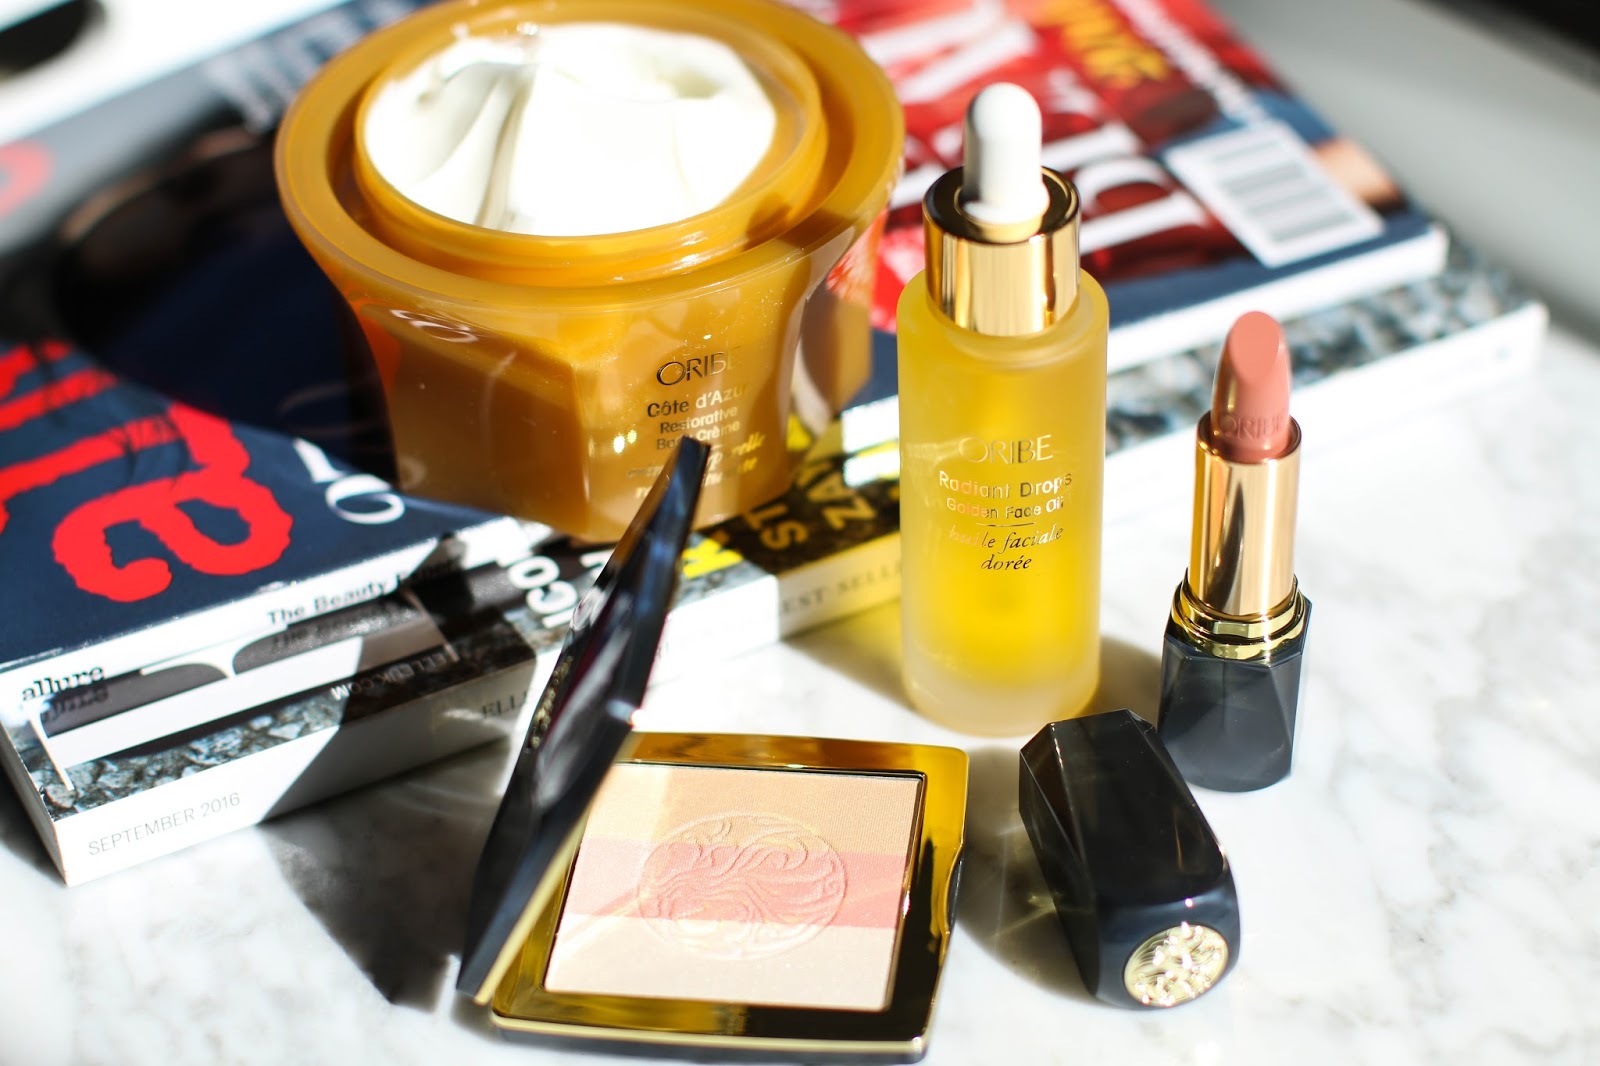 Review of the new Oribe skincare and makeup line.